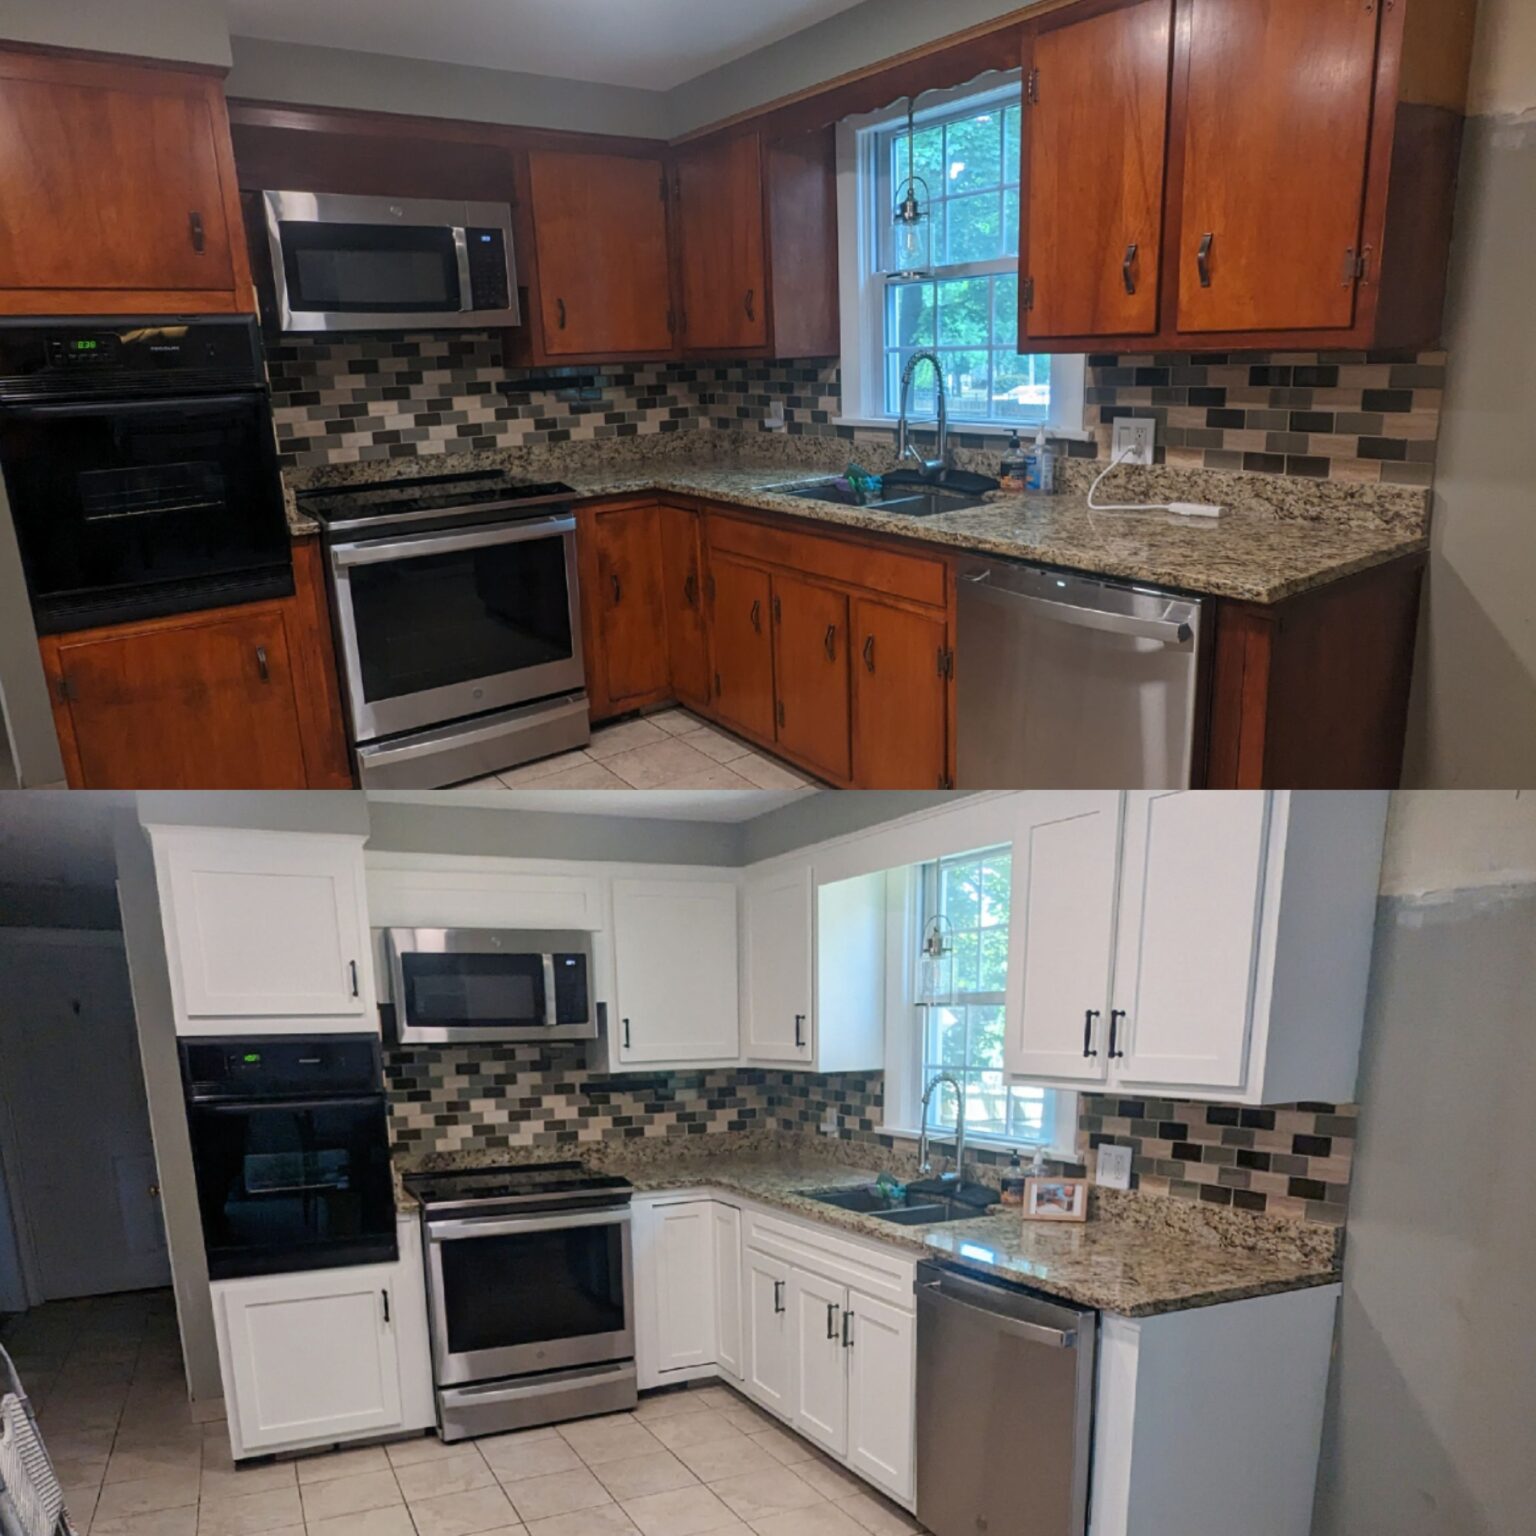 Renew Cabinets – Dream Kitchen refacing and refinishing for less!